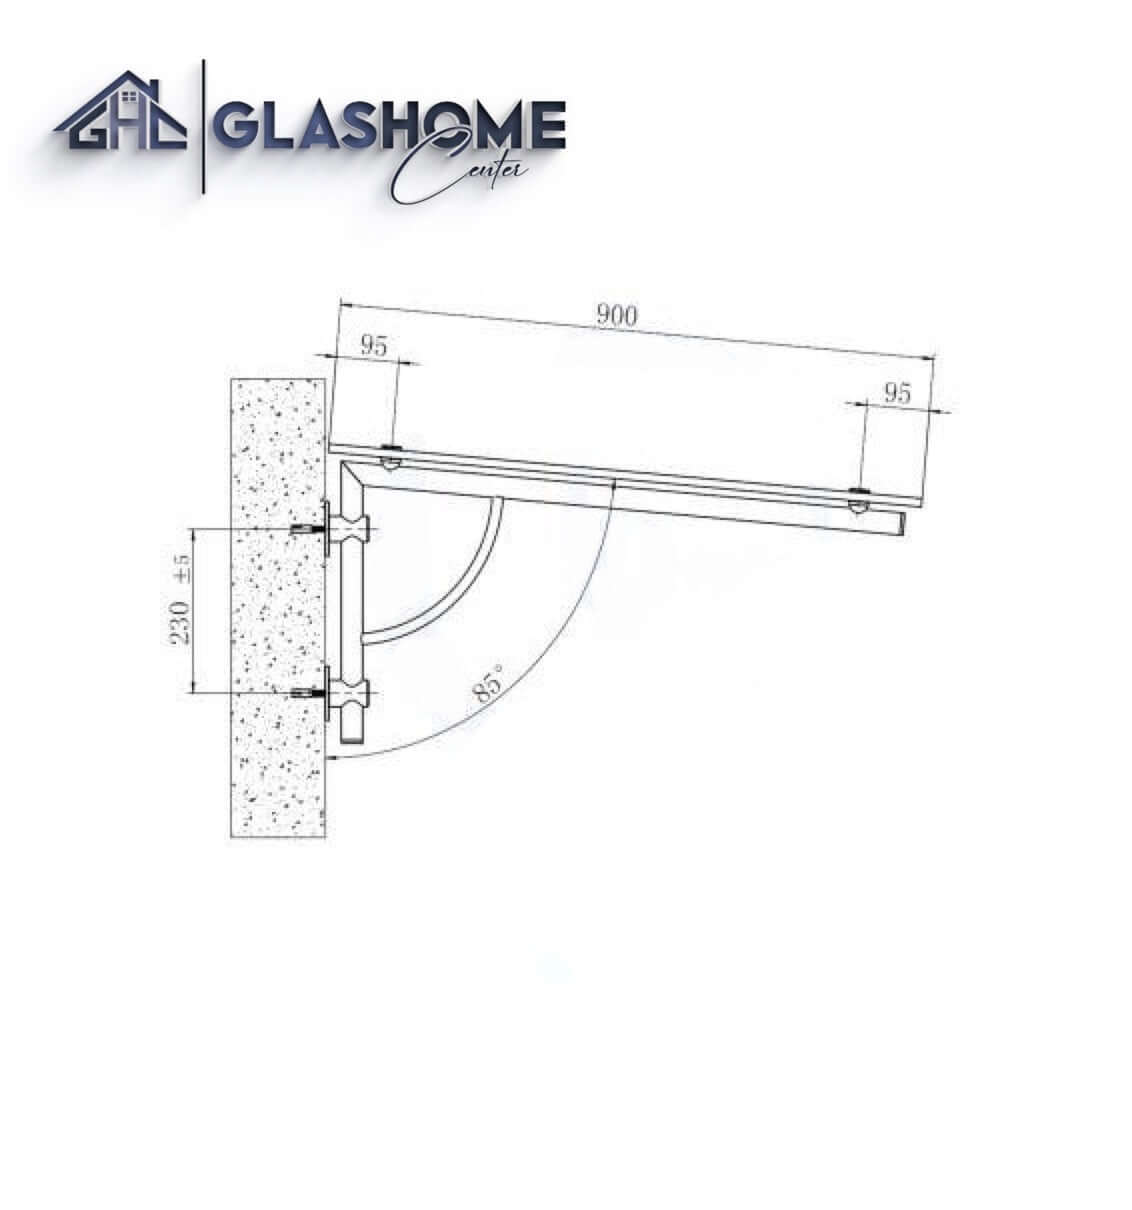 GlasHomeCenter - glass canopy - gray glass - 120x90cm - 13.1mm laminated safety glass - incl. 2 stainless steel brackets variant "Athen"